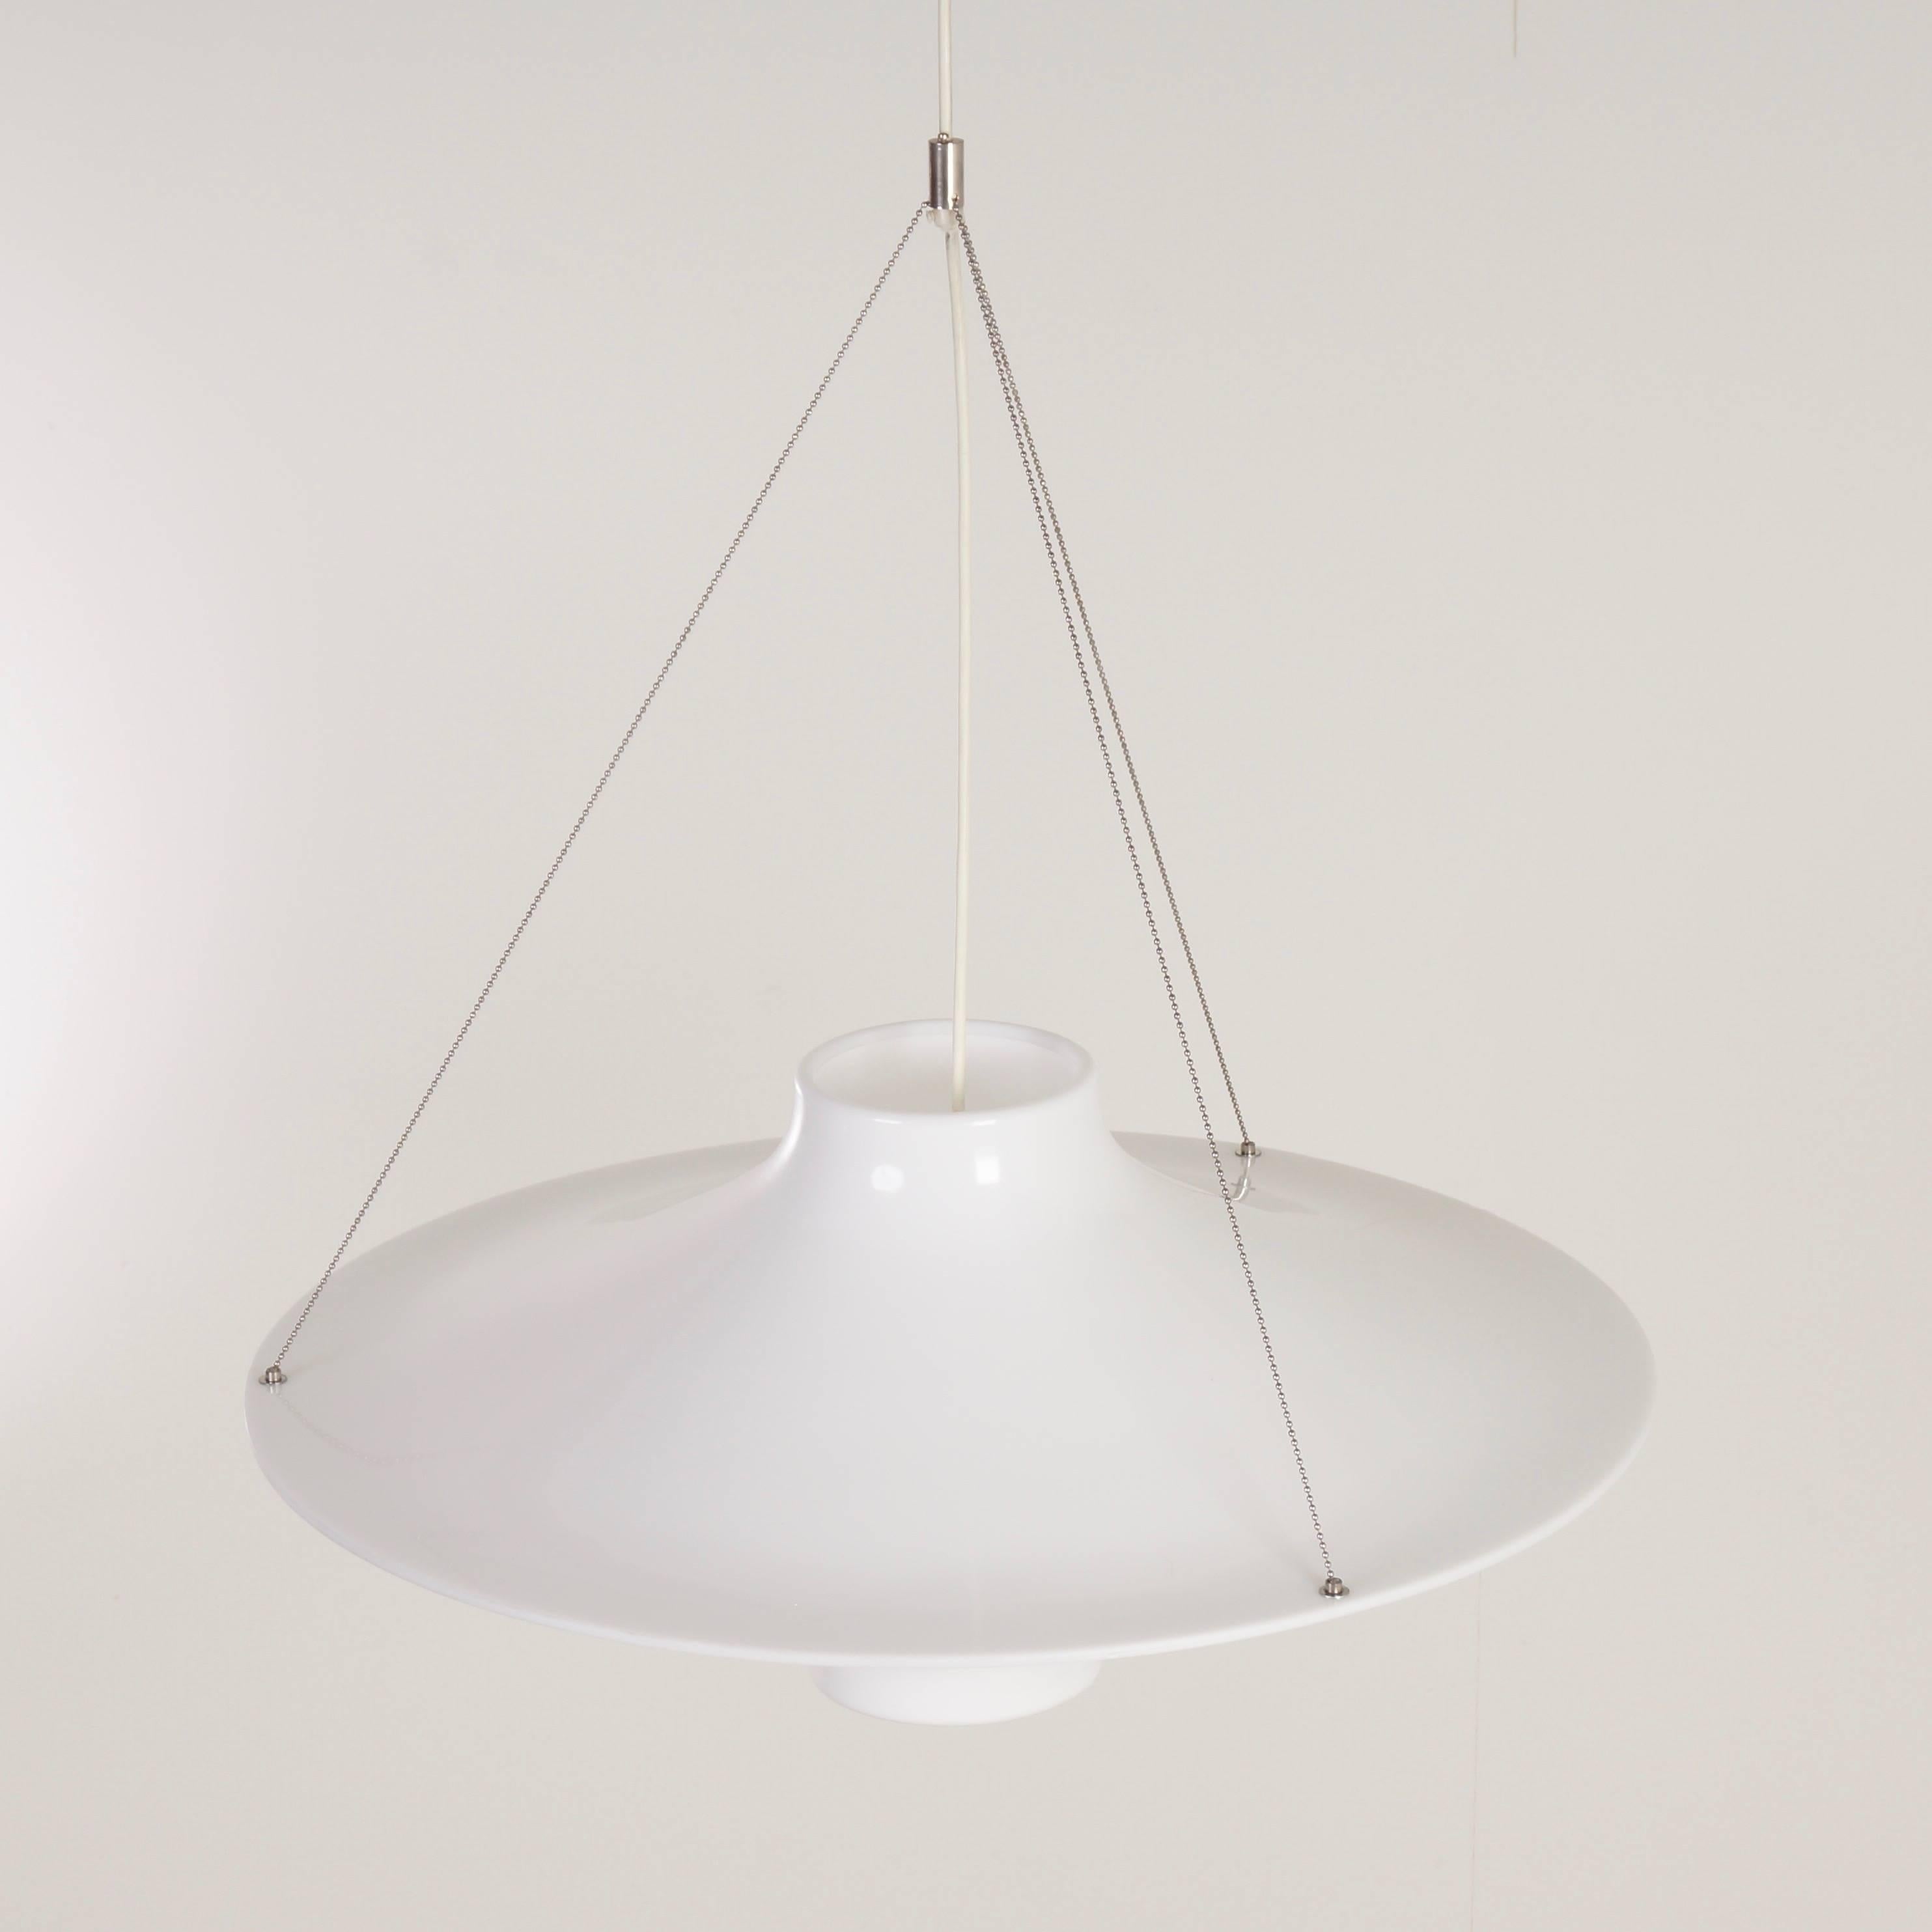 Skyflyer pendant designed by Yki Nummi (Finland) for Stockmann-Orno in 1960. Yki Nummi designed a series of plexiglass lamps in the 1950s and 1960s. This is Yki Nummi’s best known design and the lamp has also won many international awards. The shade